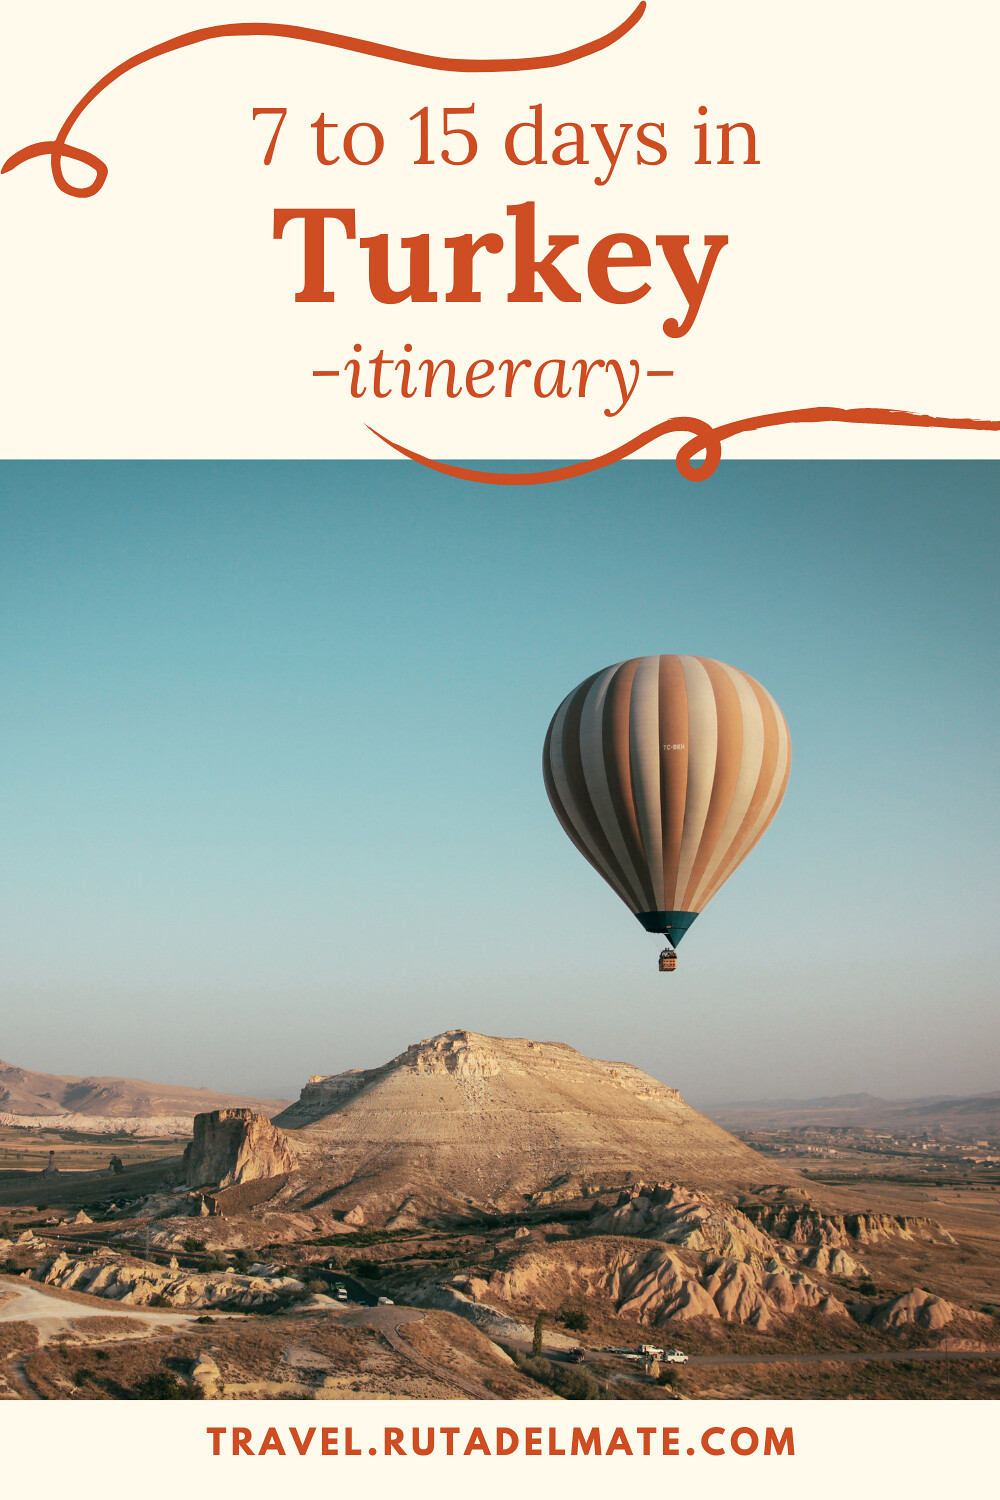 Pin 15 days in Turkey Itinerary in the text plus a photo of an hot-air balloon at sunrise in Cappadocia